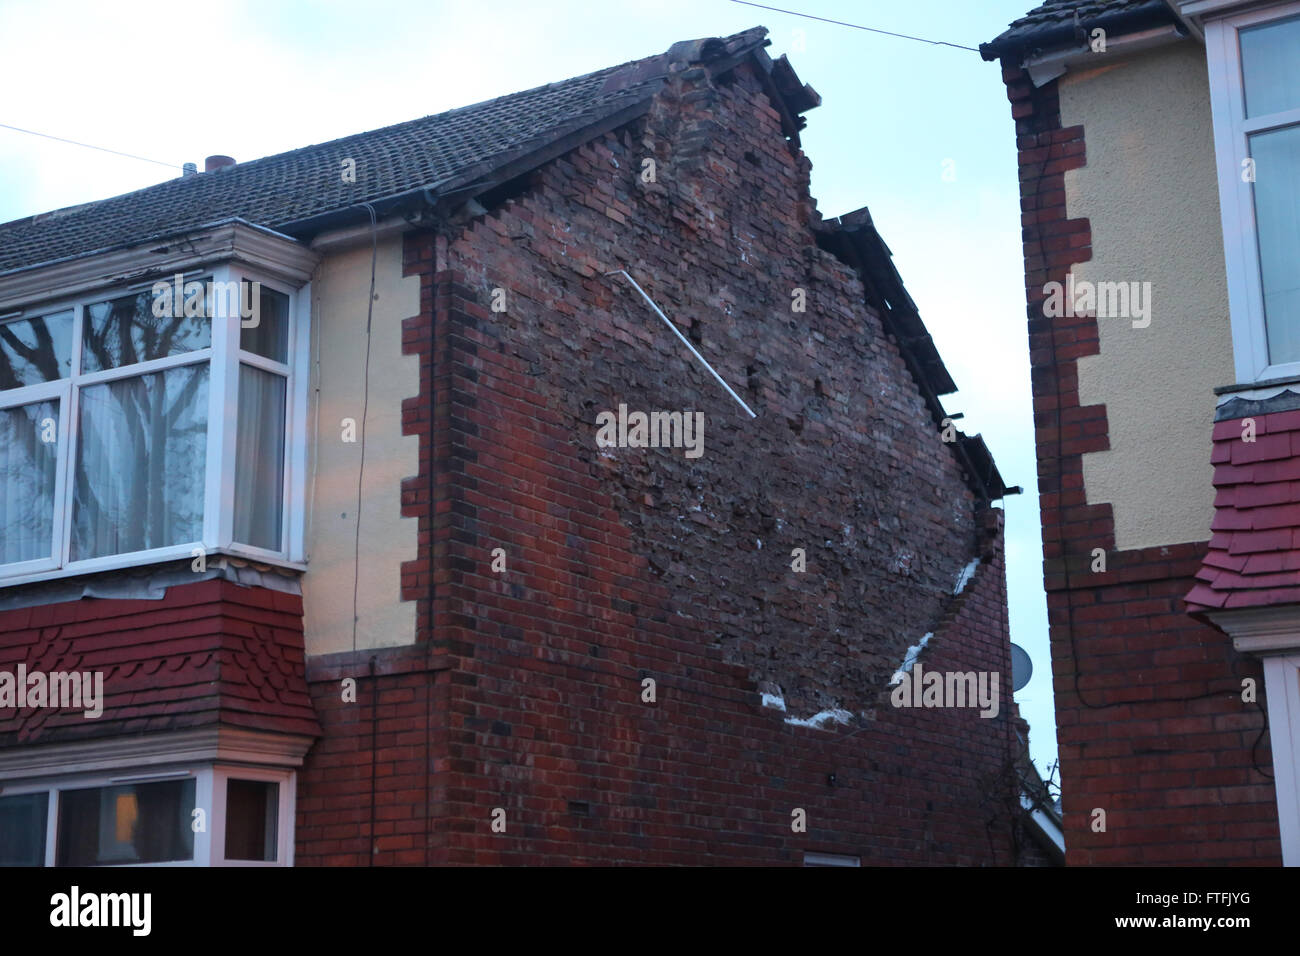 Portsmouth, Hampshire, UK. 28th March, 2016.  Storm Katie hit the South Coast with wind speed recorded of over 109 mph.  Overnight, there was some disruption and a lot of wind damage has been reported due to winds of up to 106 mph recorded on Needles on the Isle of Wight    This  Portsmouth Street is cordoned off after the gable end collapsed on the property  just after 2am  Two fire crews from Southsea fire station in Portsmouth attended and made safe a roof in a dangerous condition in Copnor Credit:  uknip/Alamy Live News Stock Photo